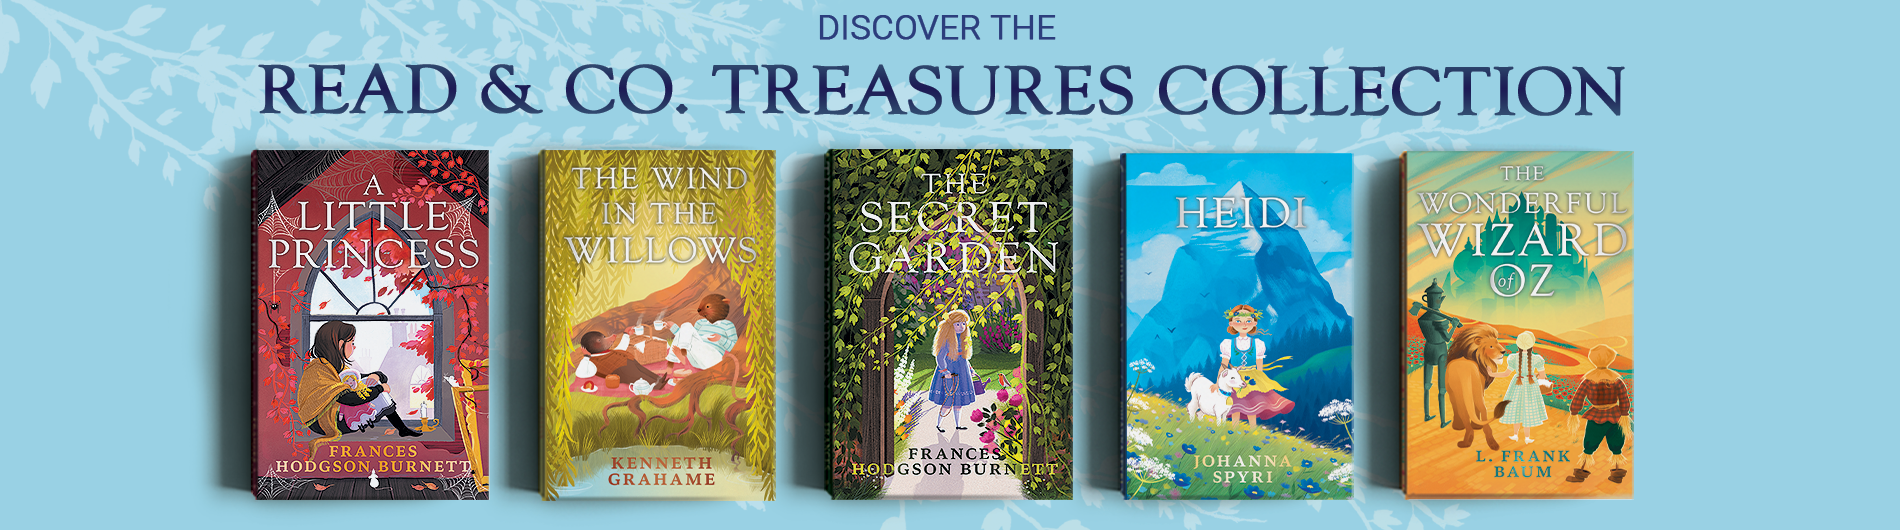 Read & Co. Treasures Collection Book Collection Banner